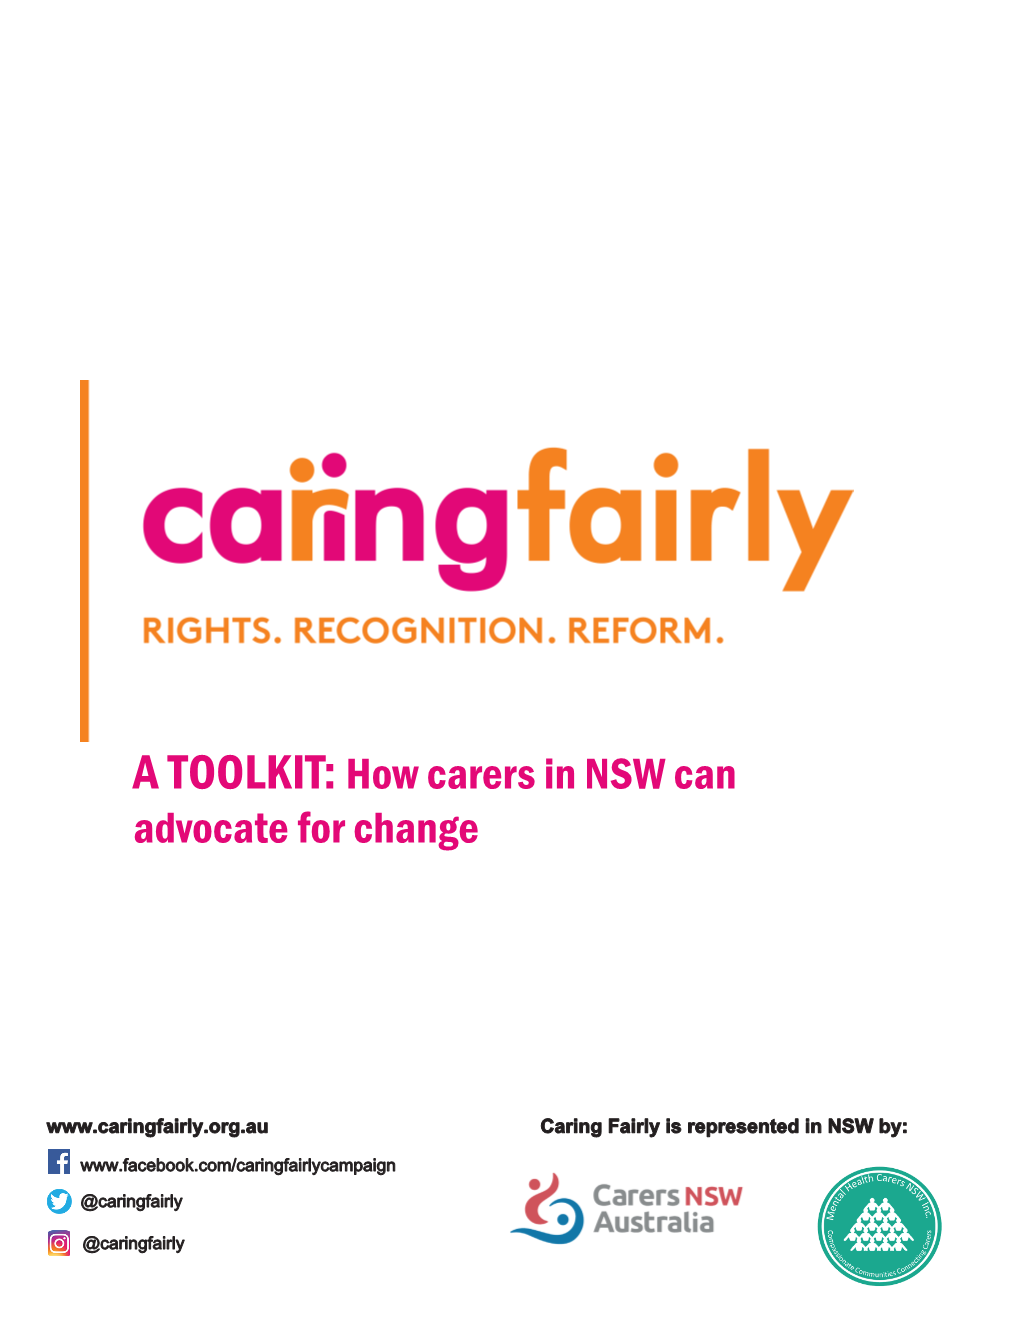 A TOOLKIT: How Carers in NSW Can Advocate for Change